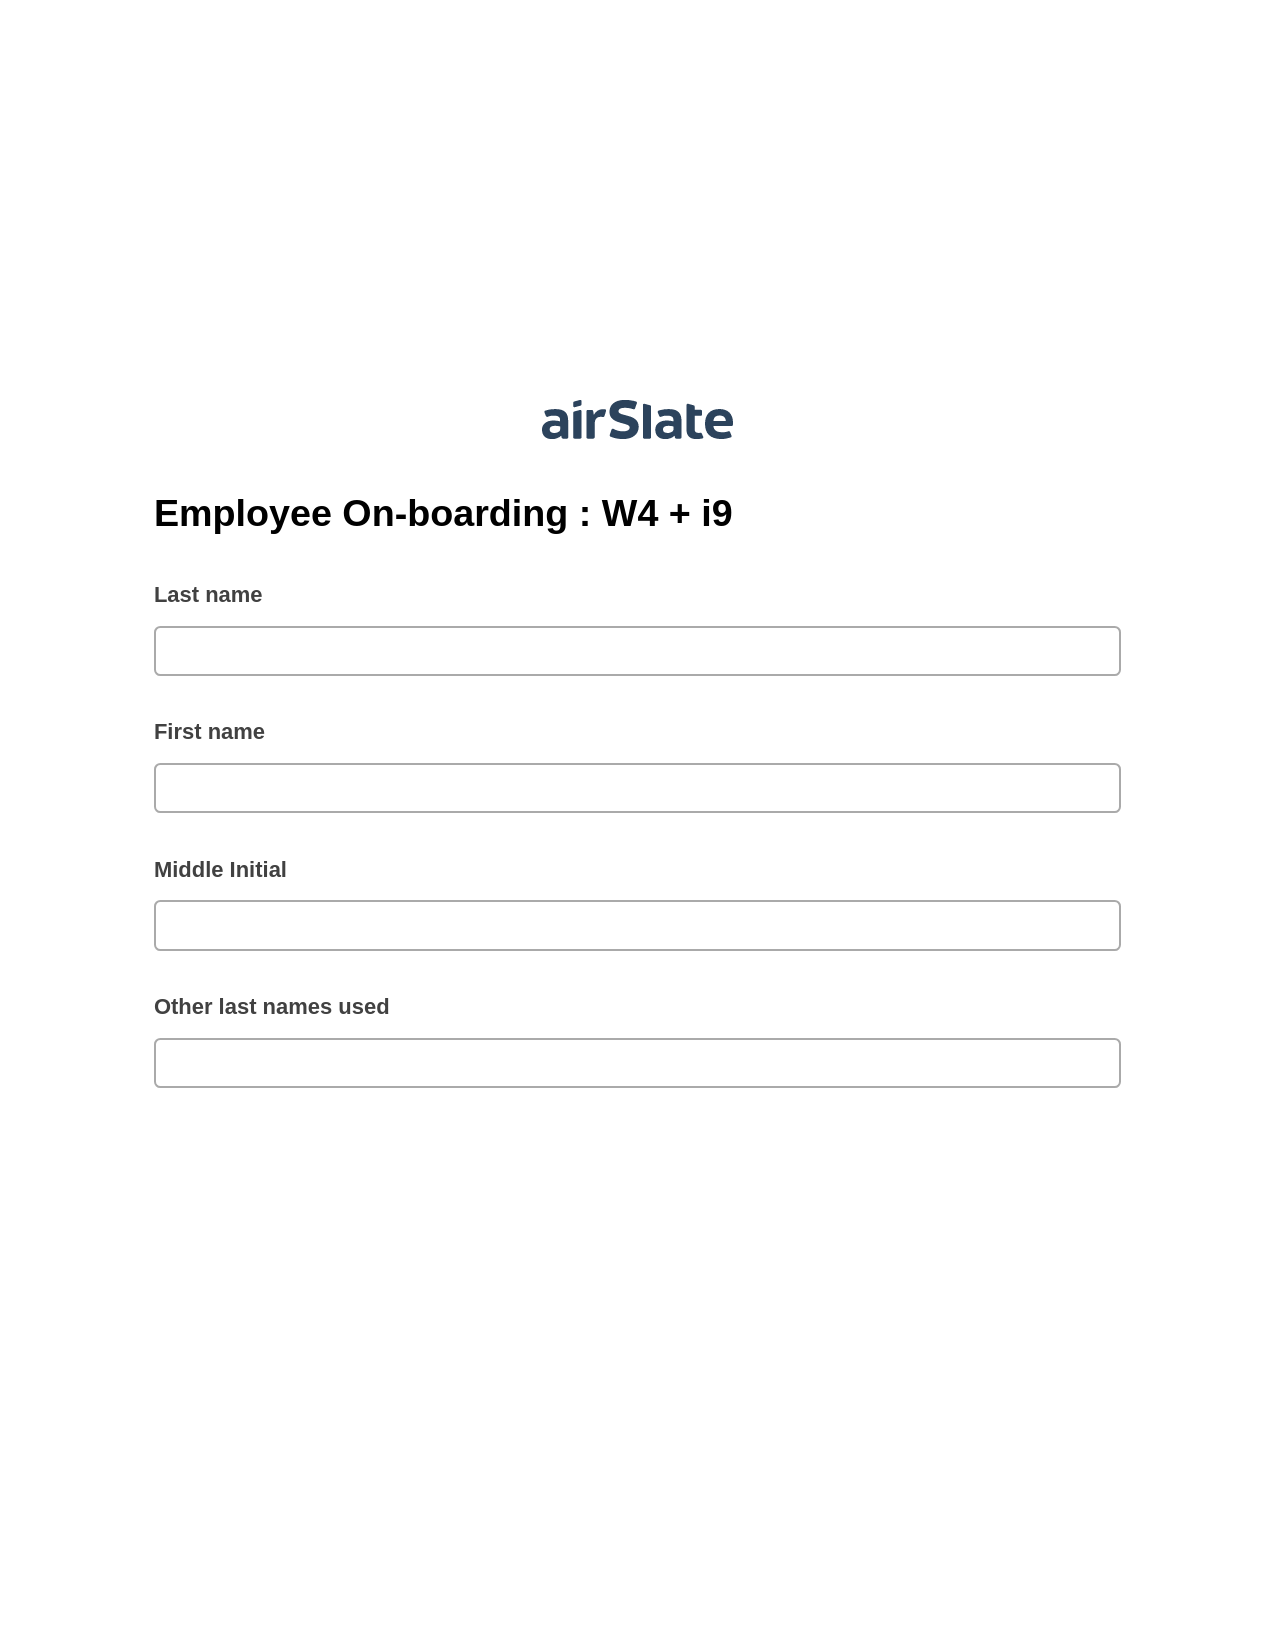 Employee On-boarding : W4 + i9 Pre-fill Dropdowns from Google Sheet Bot, Slack Notification Bot, Export to Excel 365 Bot